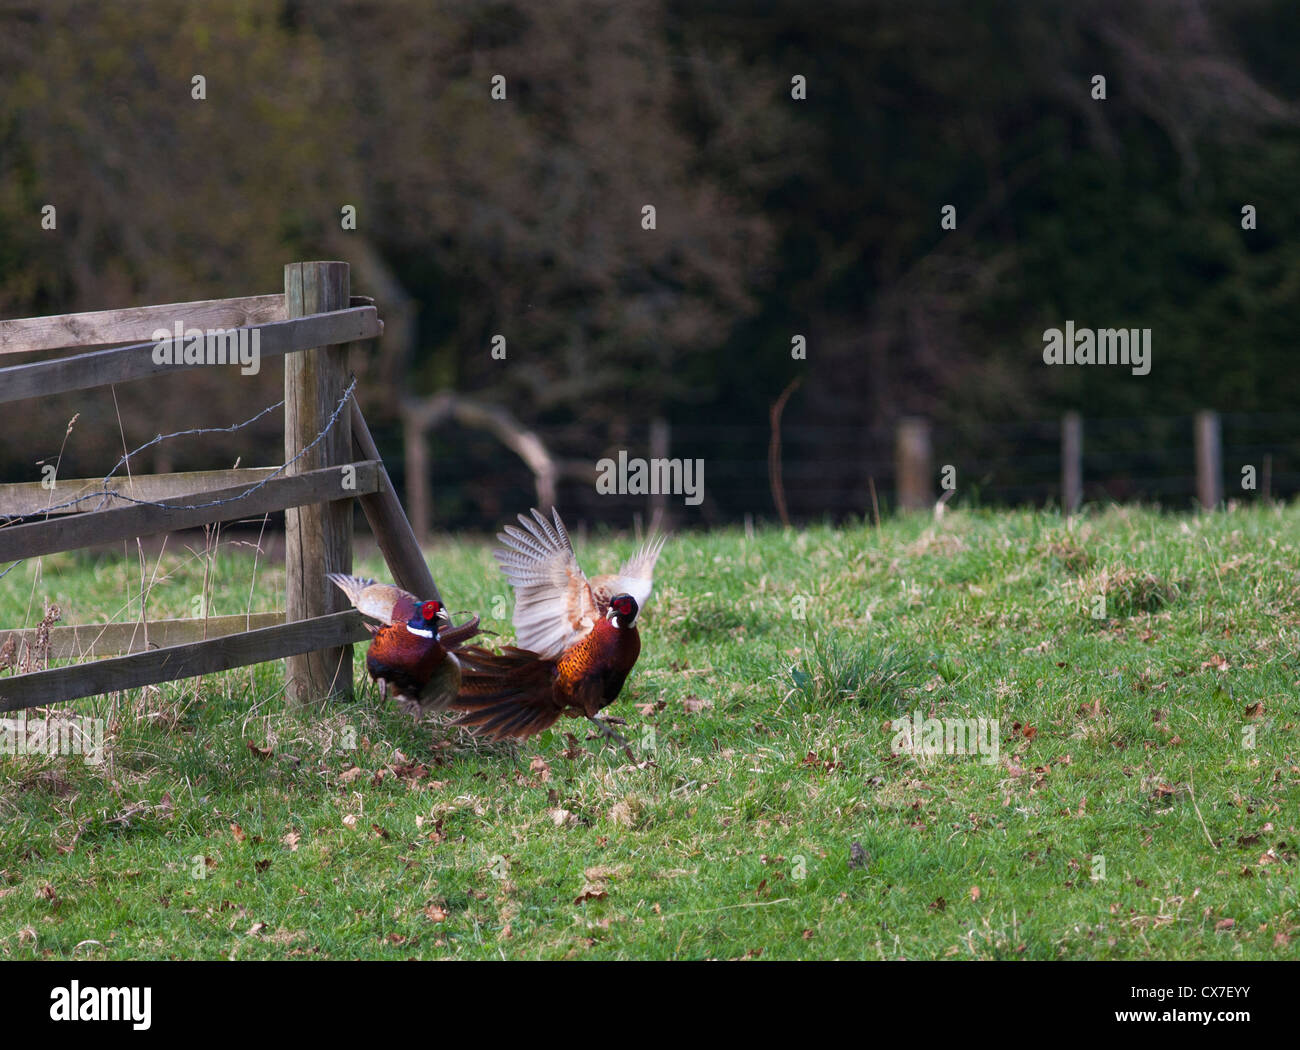 A Bird Taking Flight Off The Ground By A Wooden Fence; Hirsel, Scottish Borders, Scotland Stock Photo